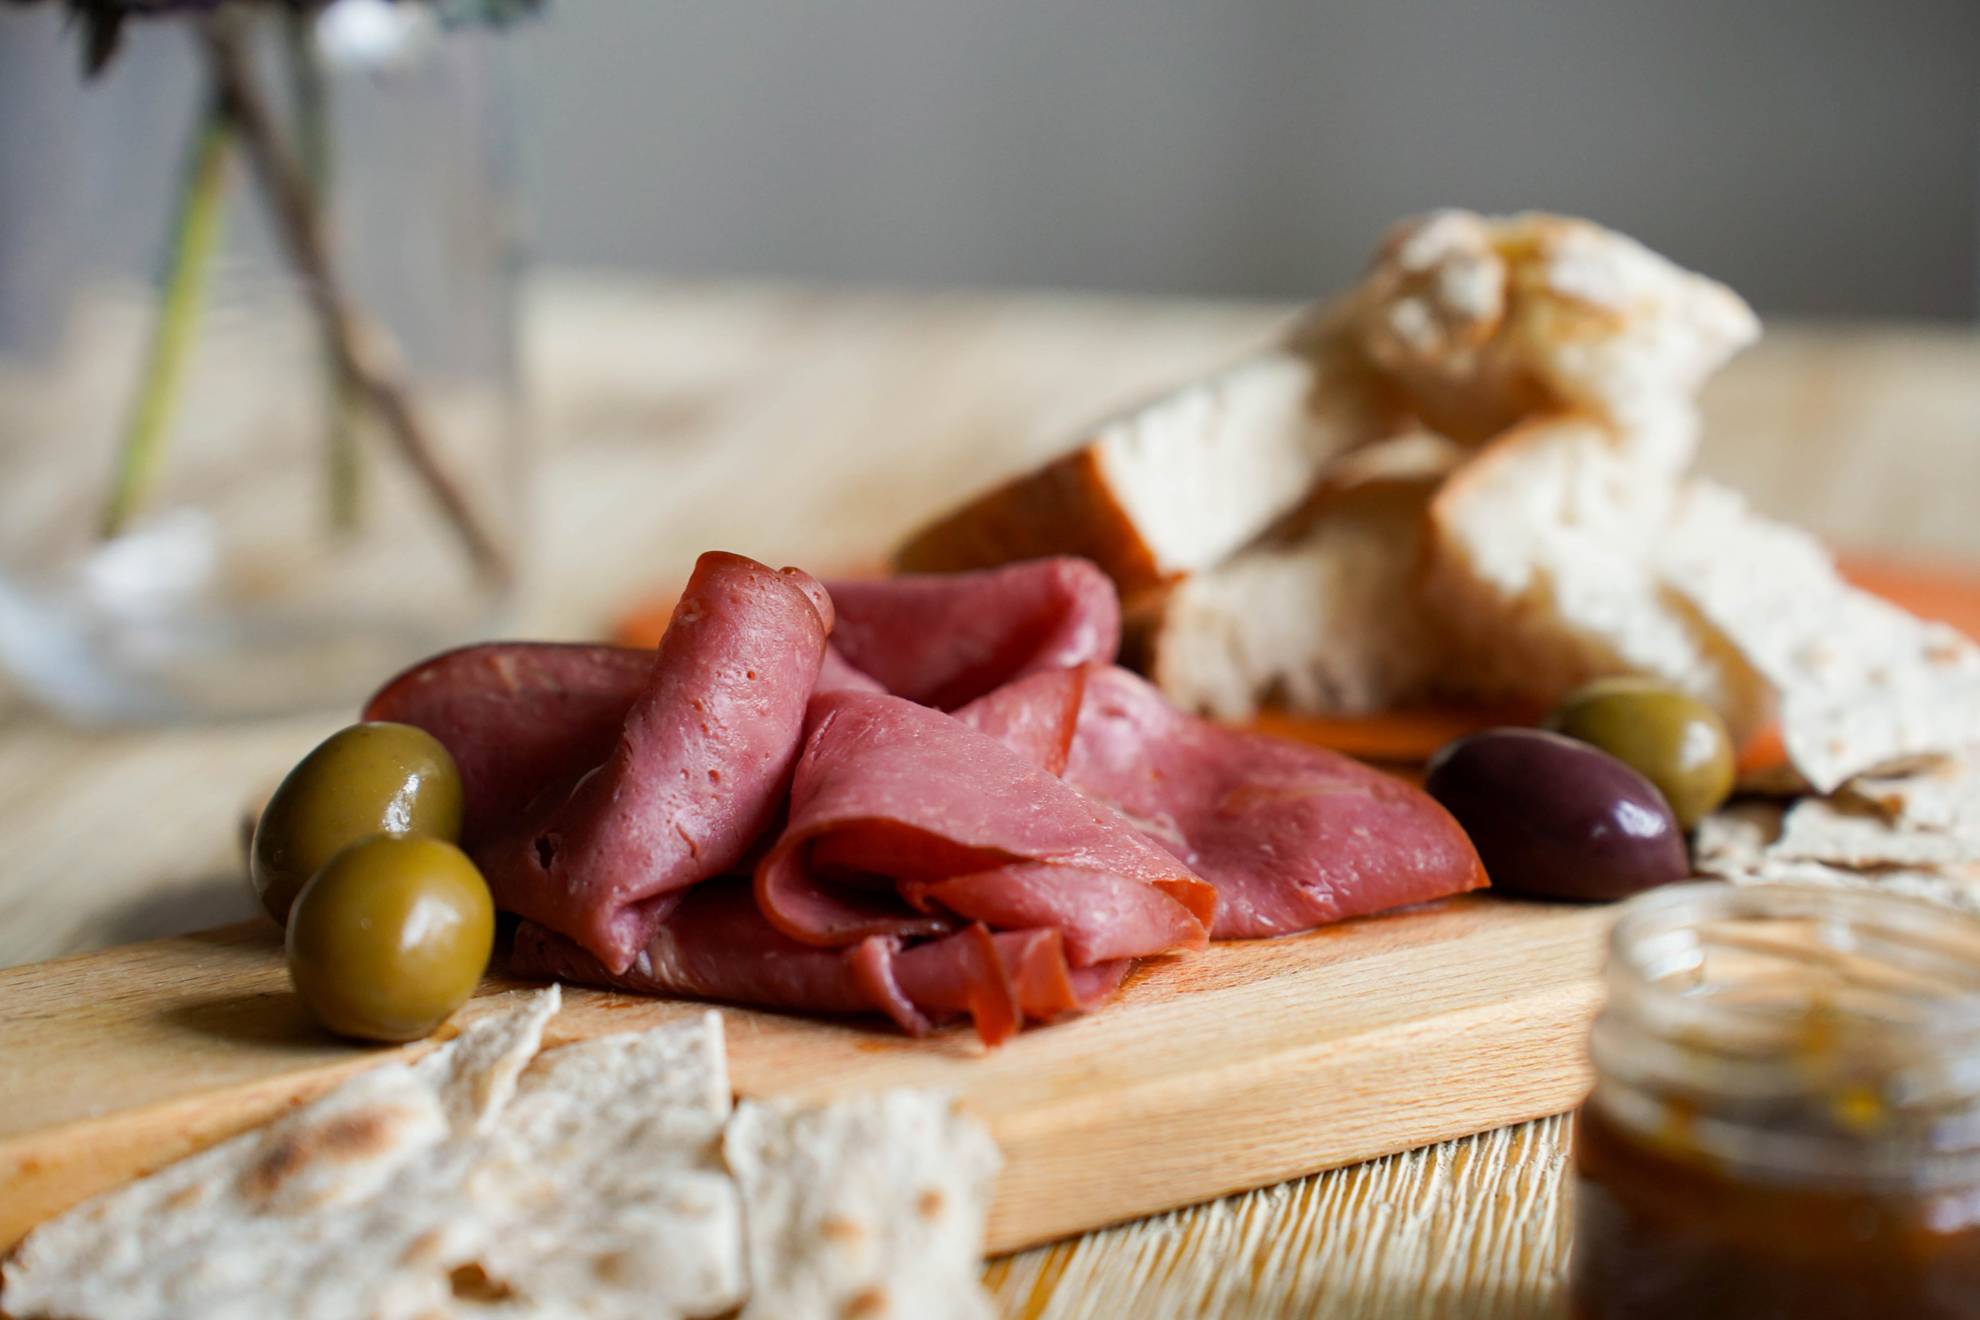 A charcuterie board with olives, bread and smoked reindeer meat.